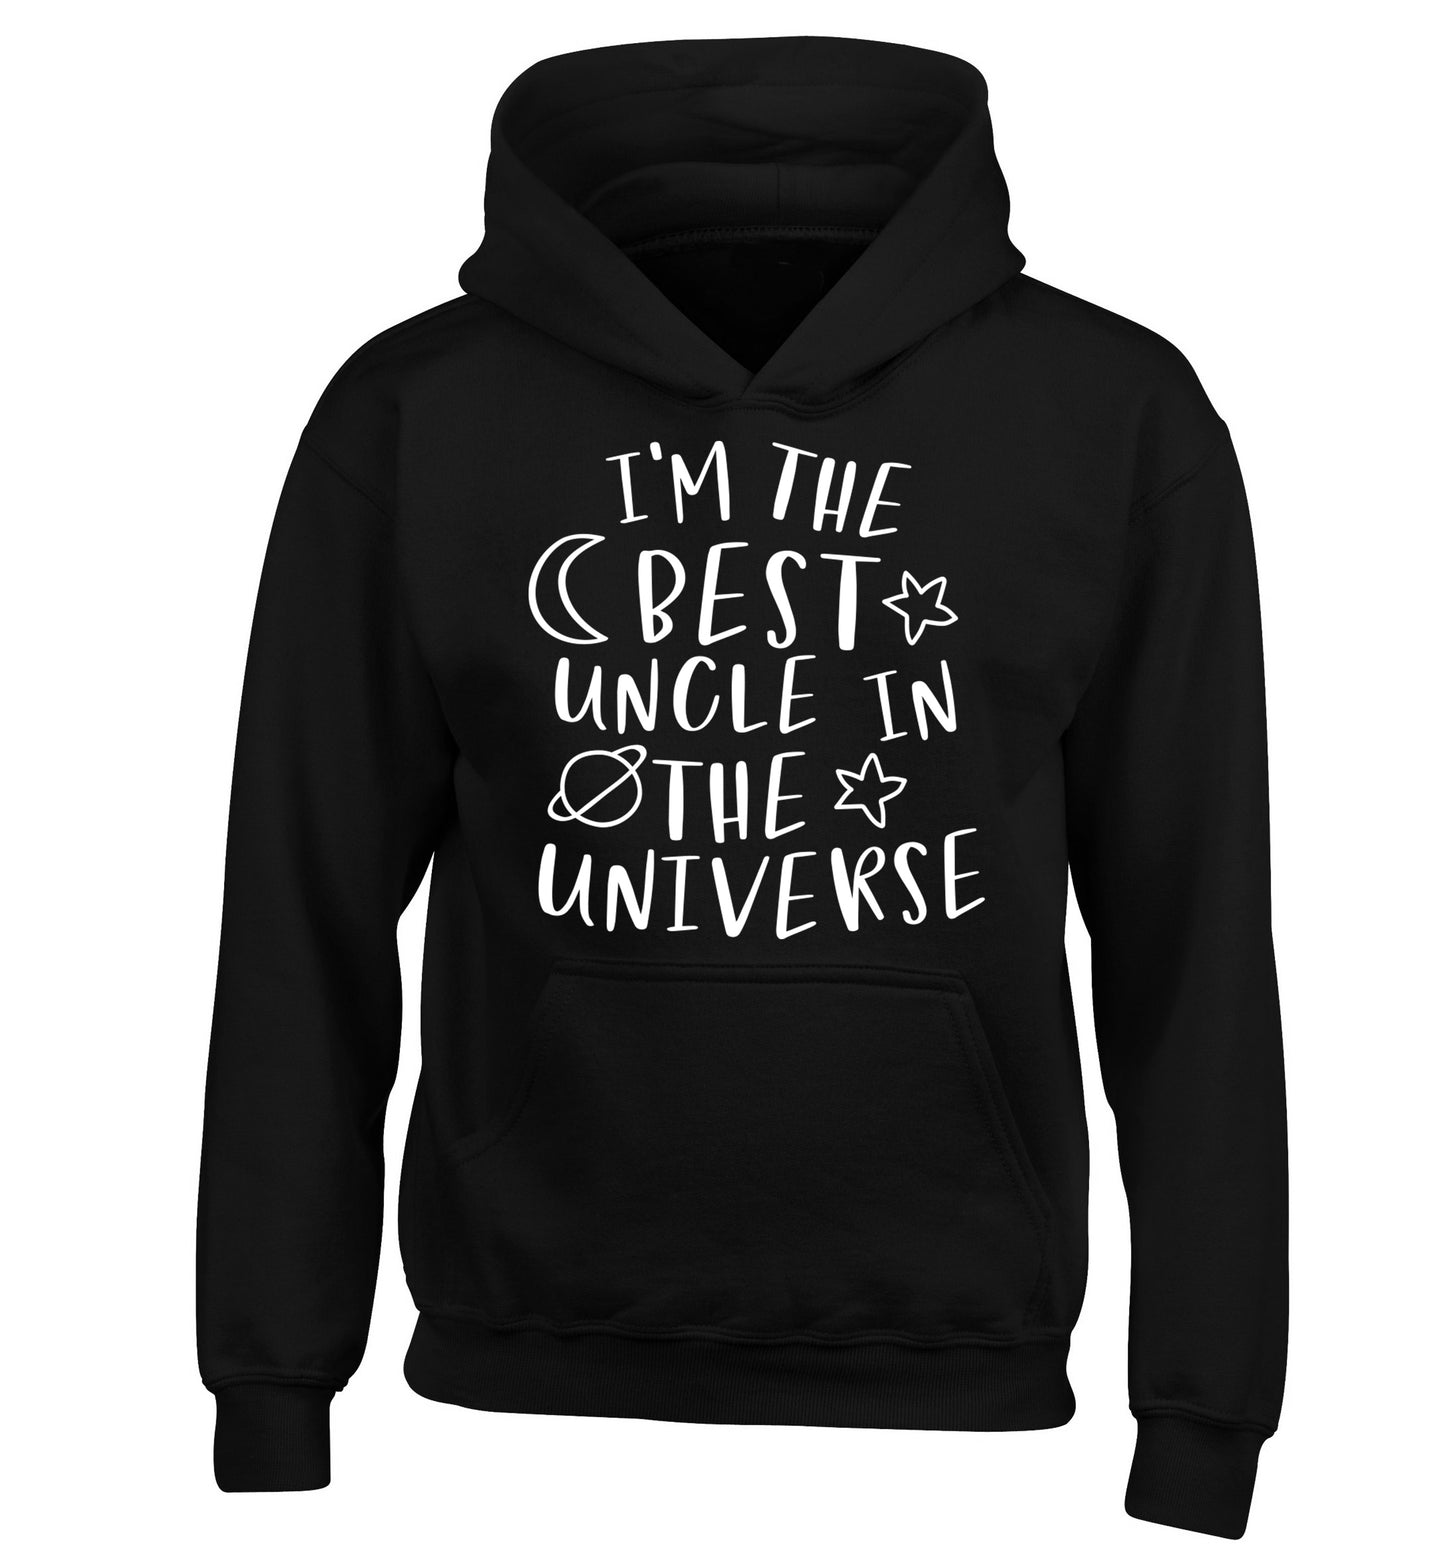 I'm the best uncle in the universe children's black hoodie 12-13 Years